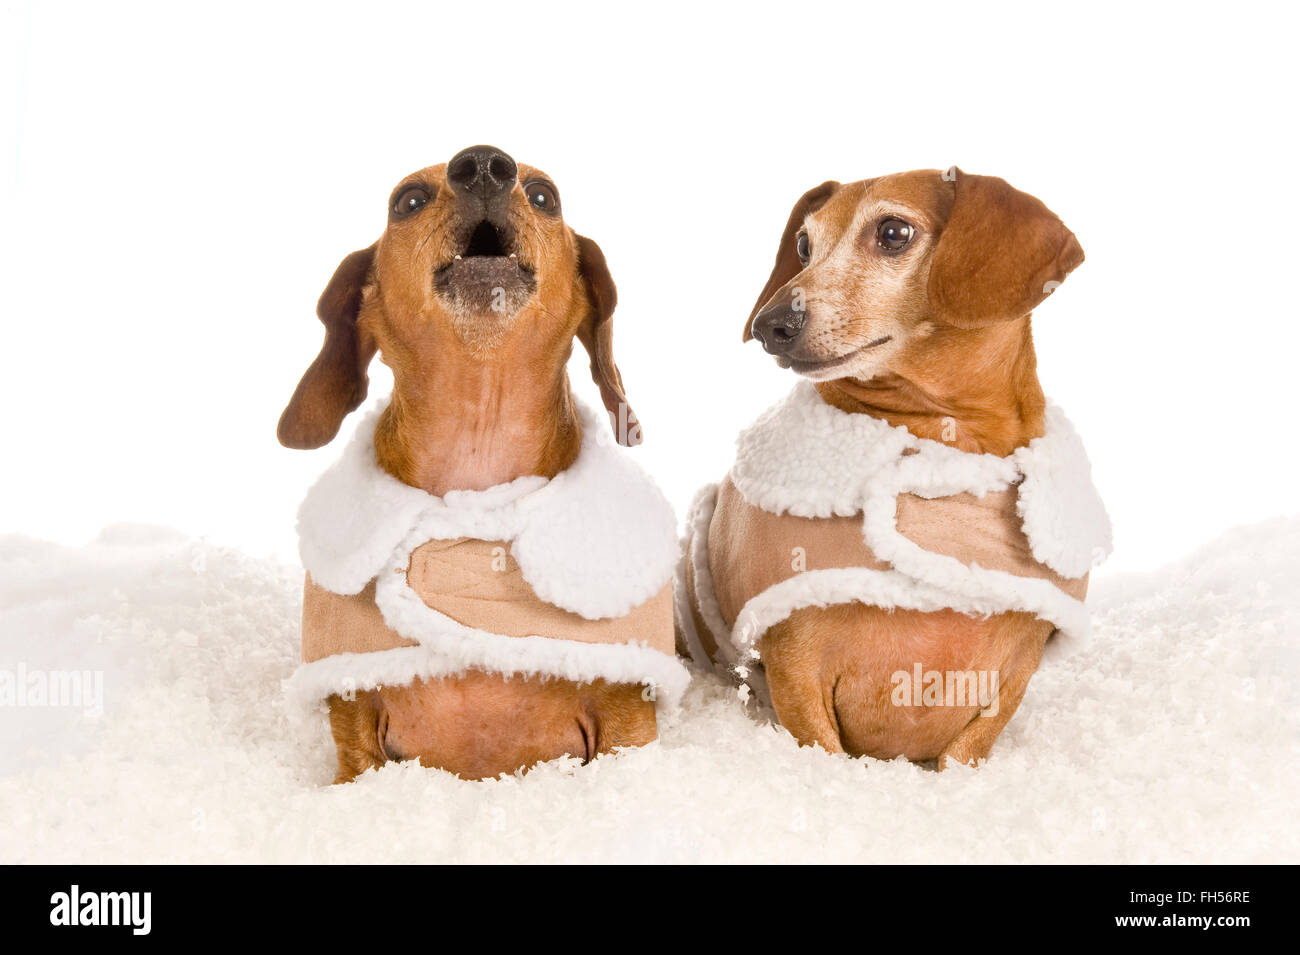 Two Dachshund Dogs In Winter Clothing Calling For Help Stock Photo